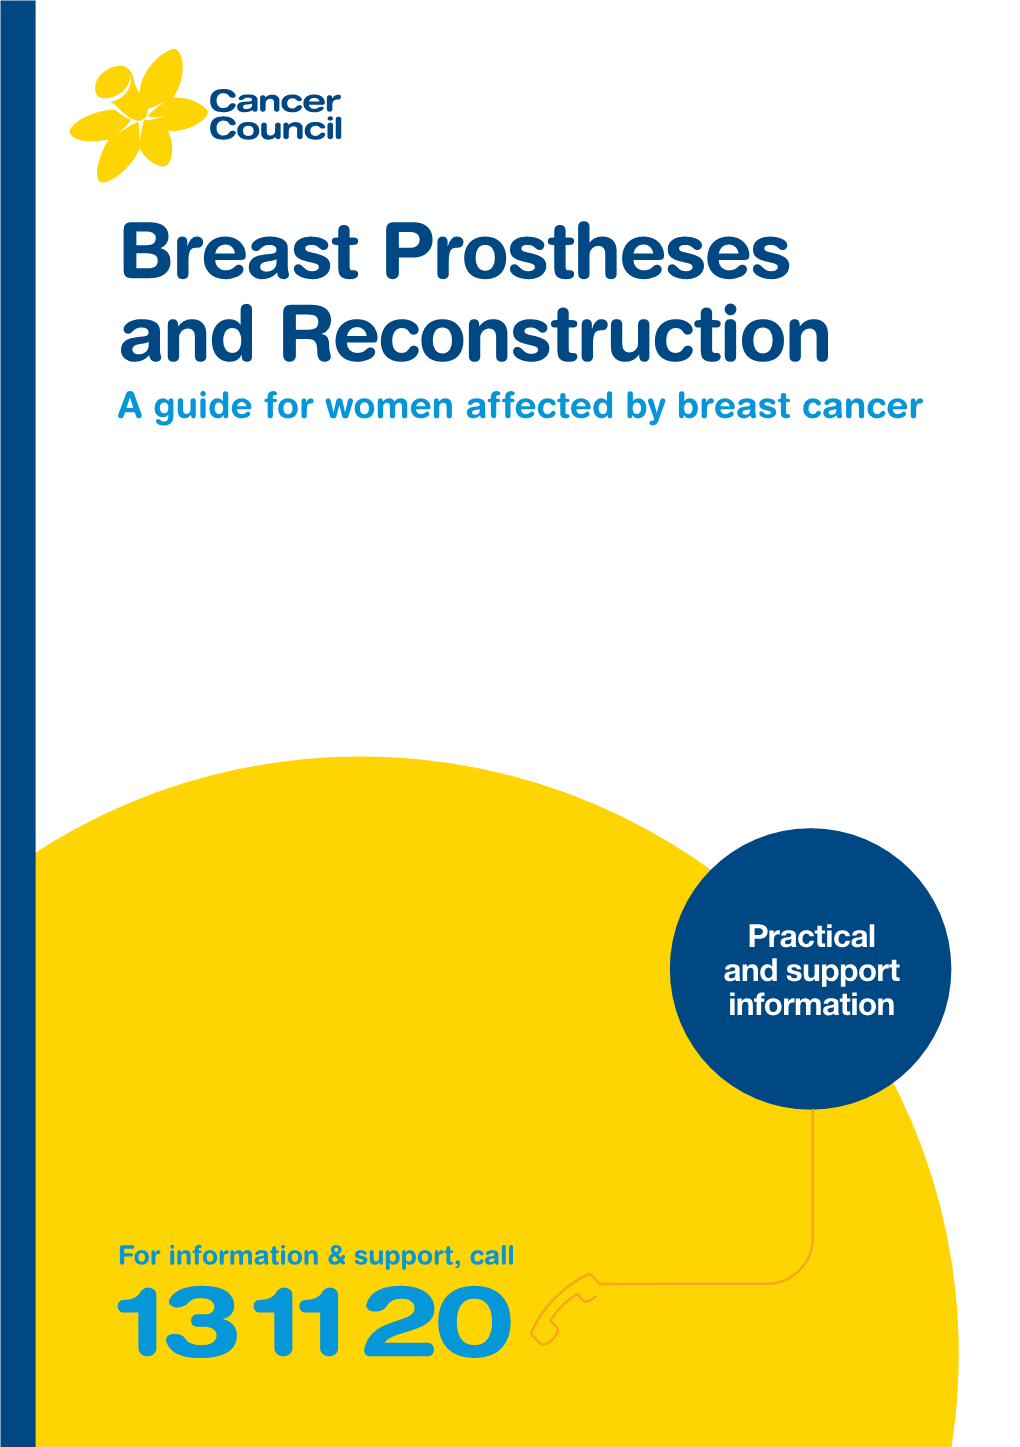 Breast Prostheses Reconstruction Booklet